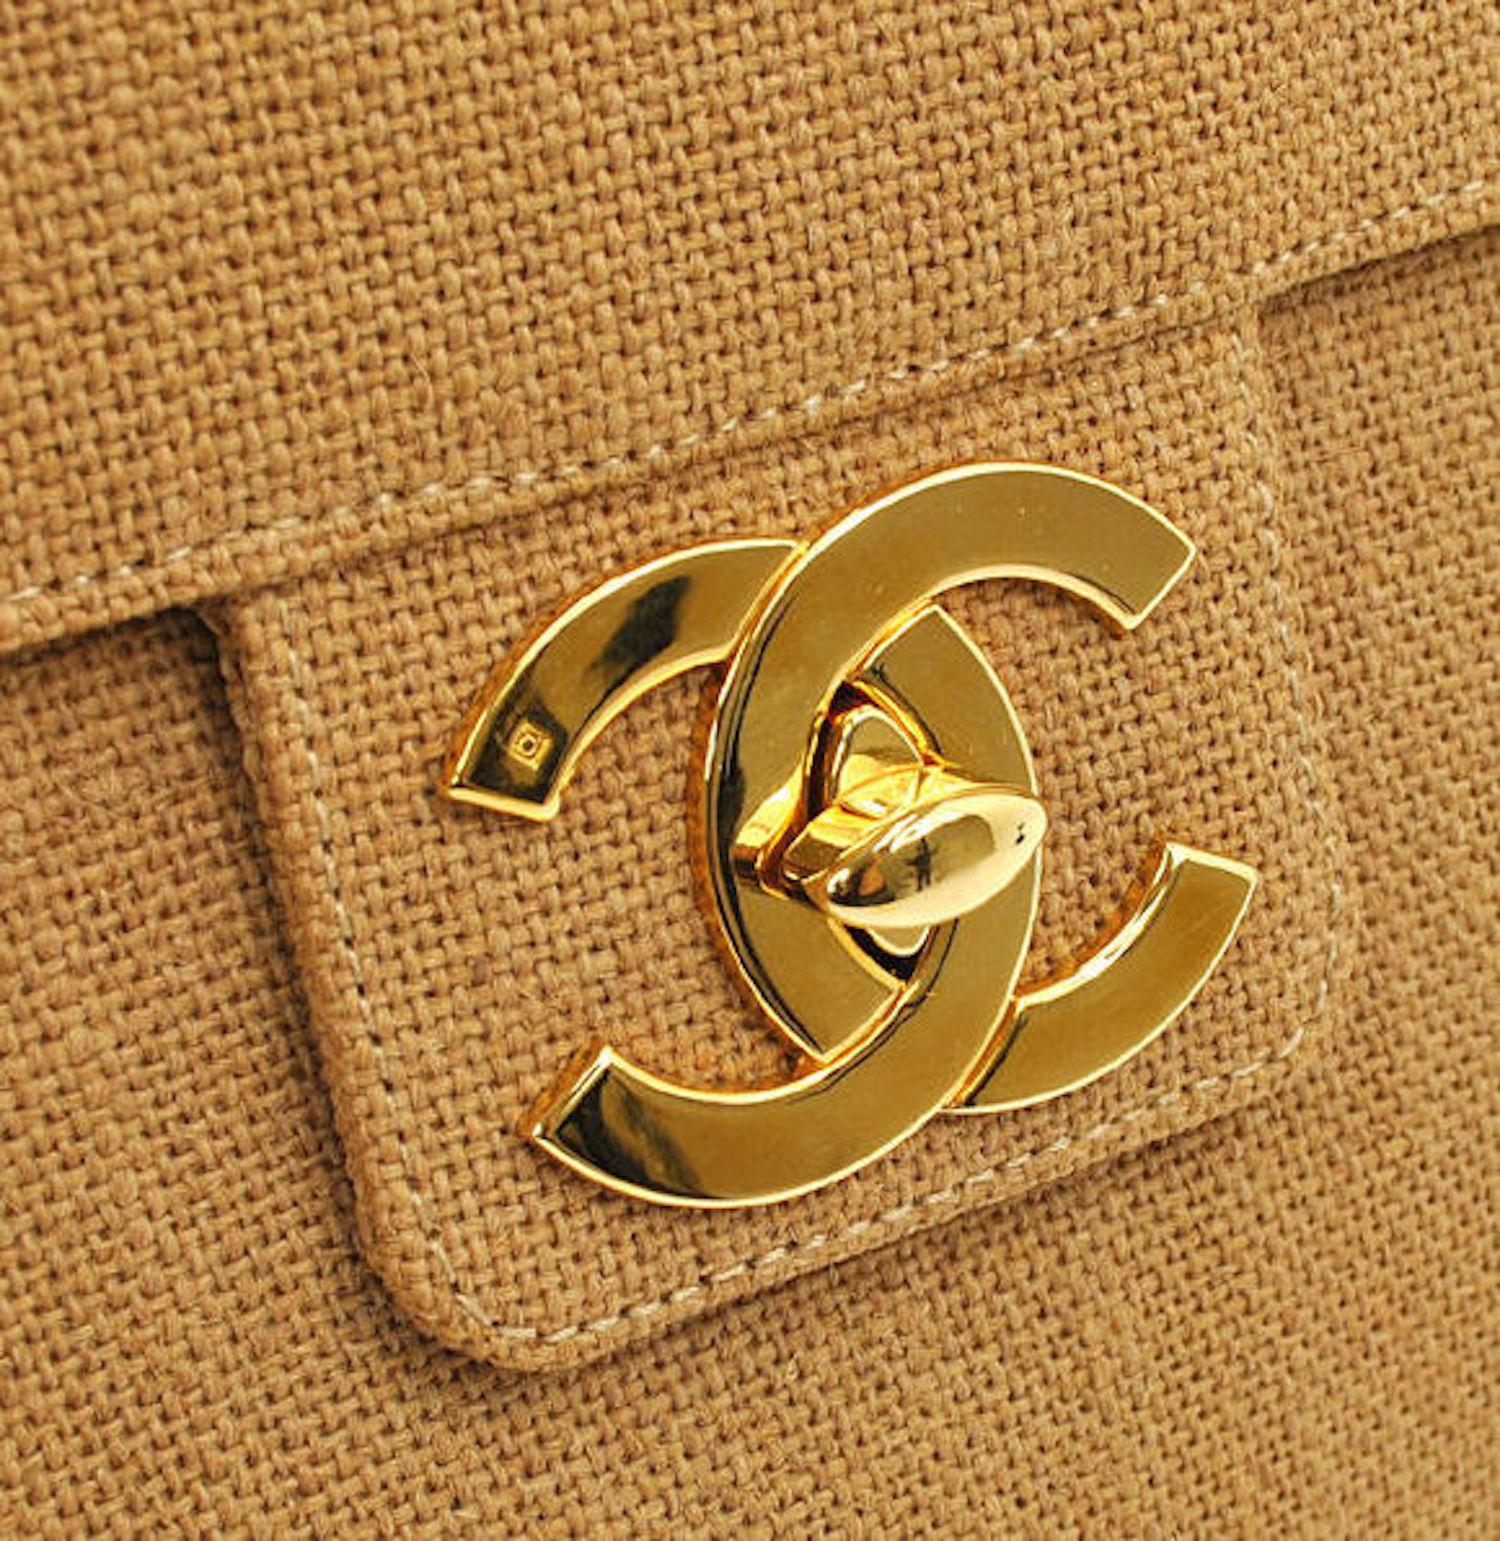 Chanel Vintage Cognac Tan Canvas Men's Women's Large Charm Top Handle Business Flap Bag

Canvas
Gold tone hardware
Leather lining
Date code present
Made in France
Handle drop 2